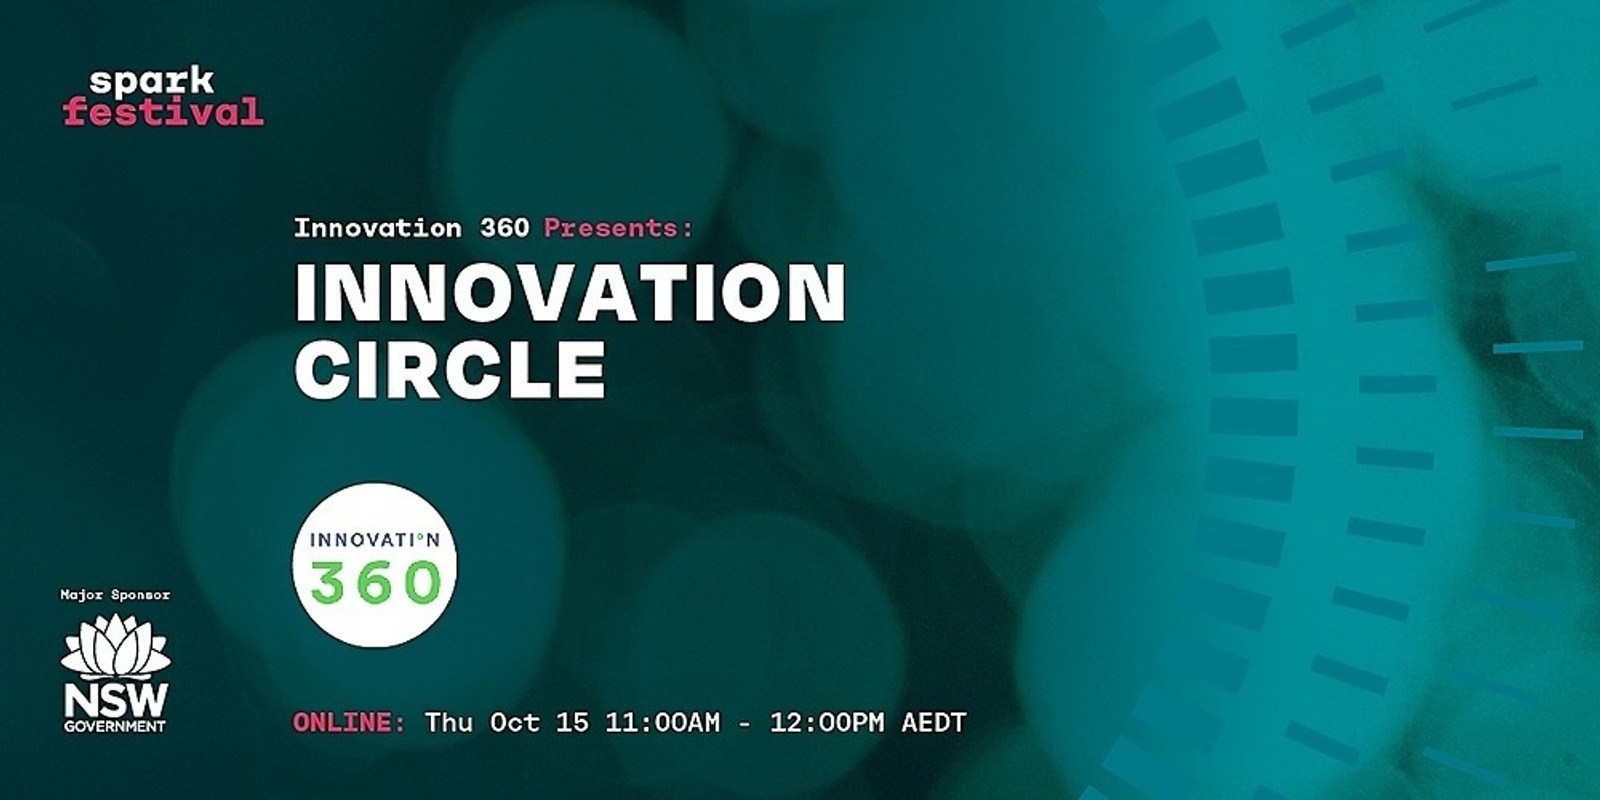 Banner image for Innovation Circle